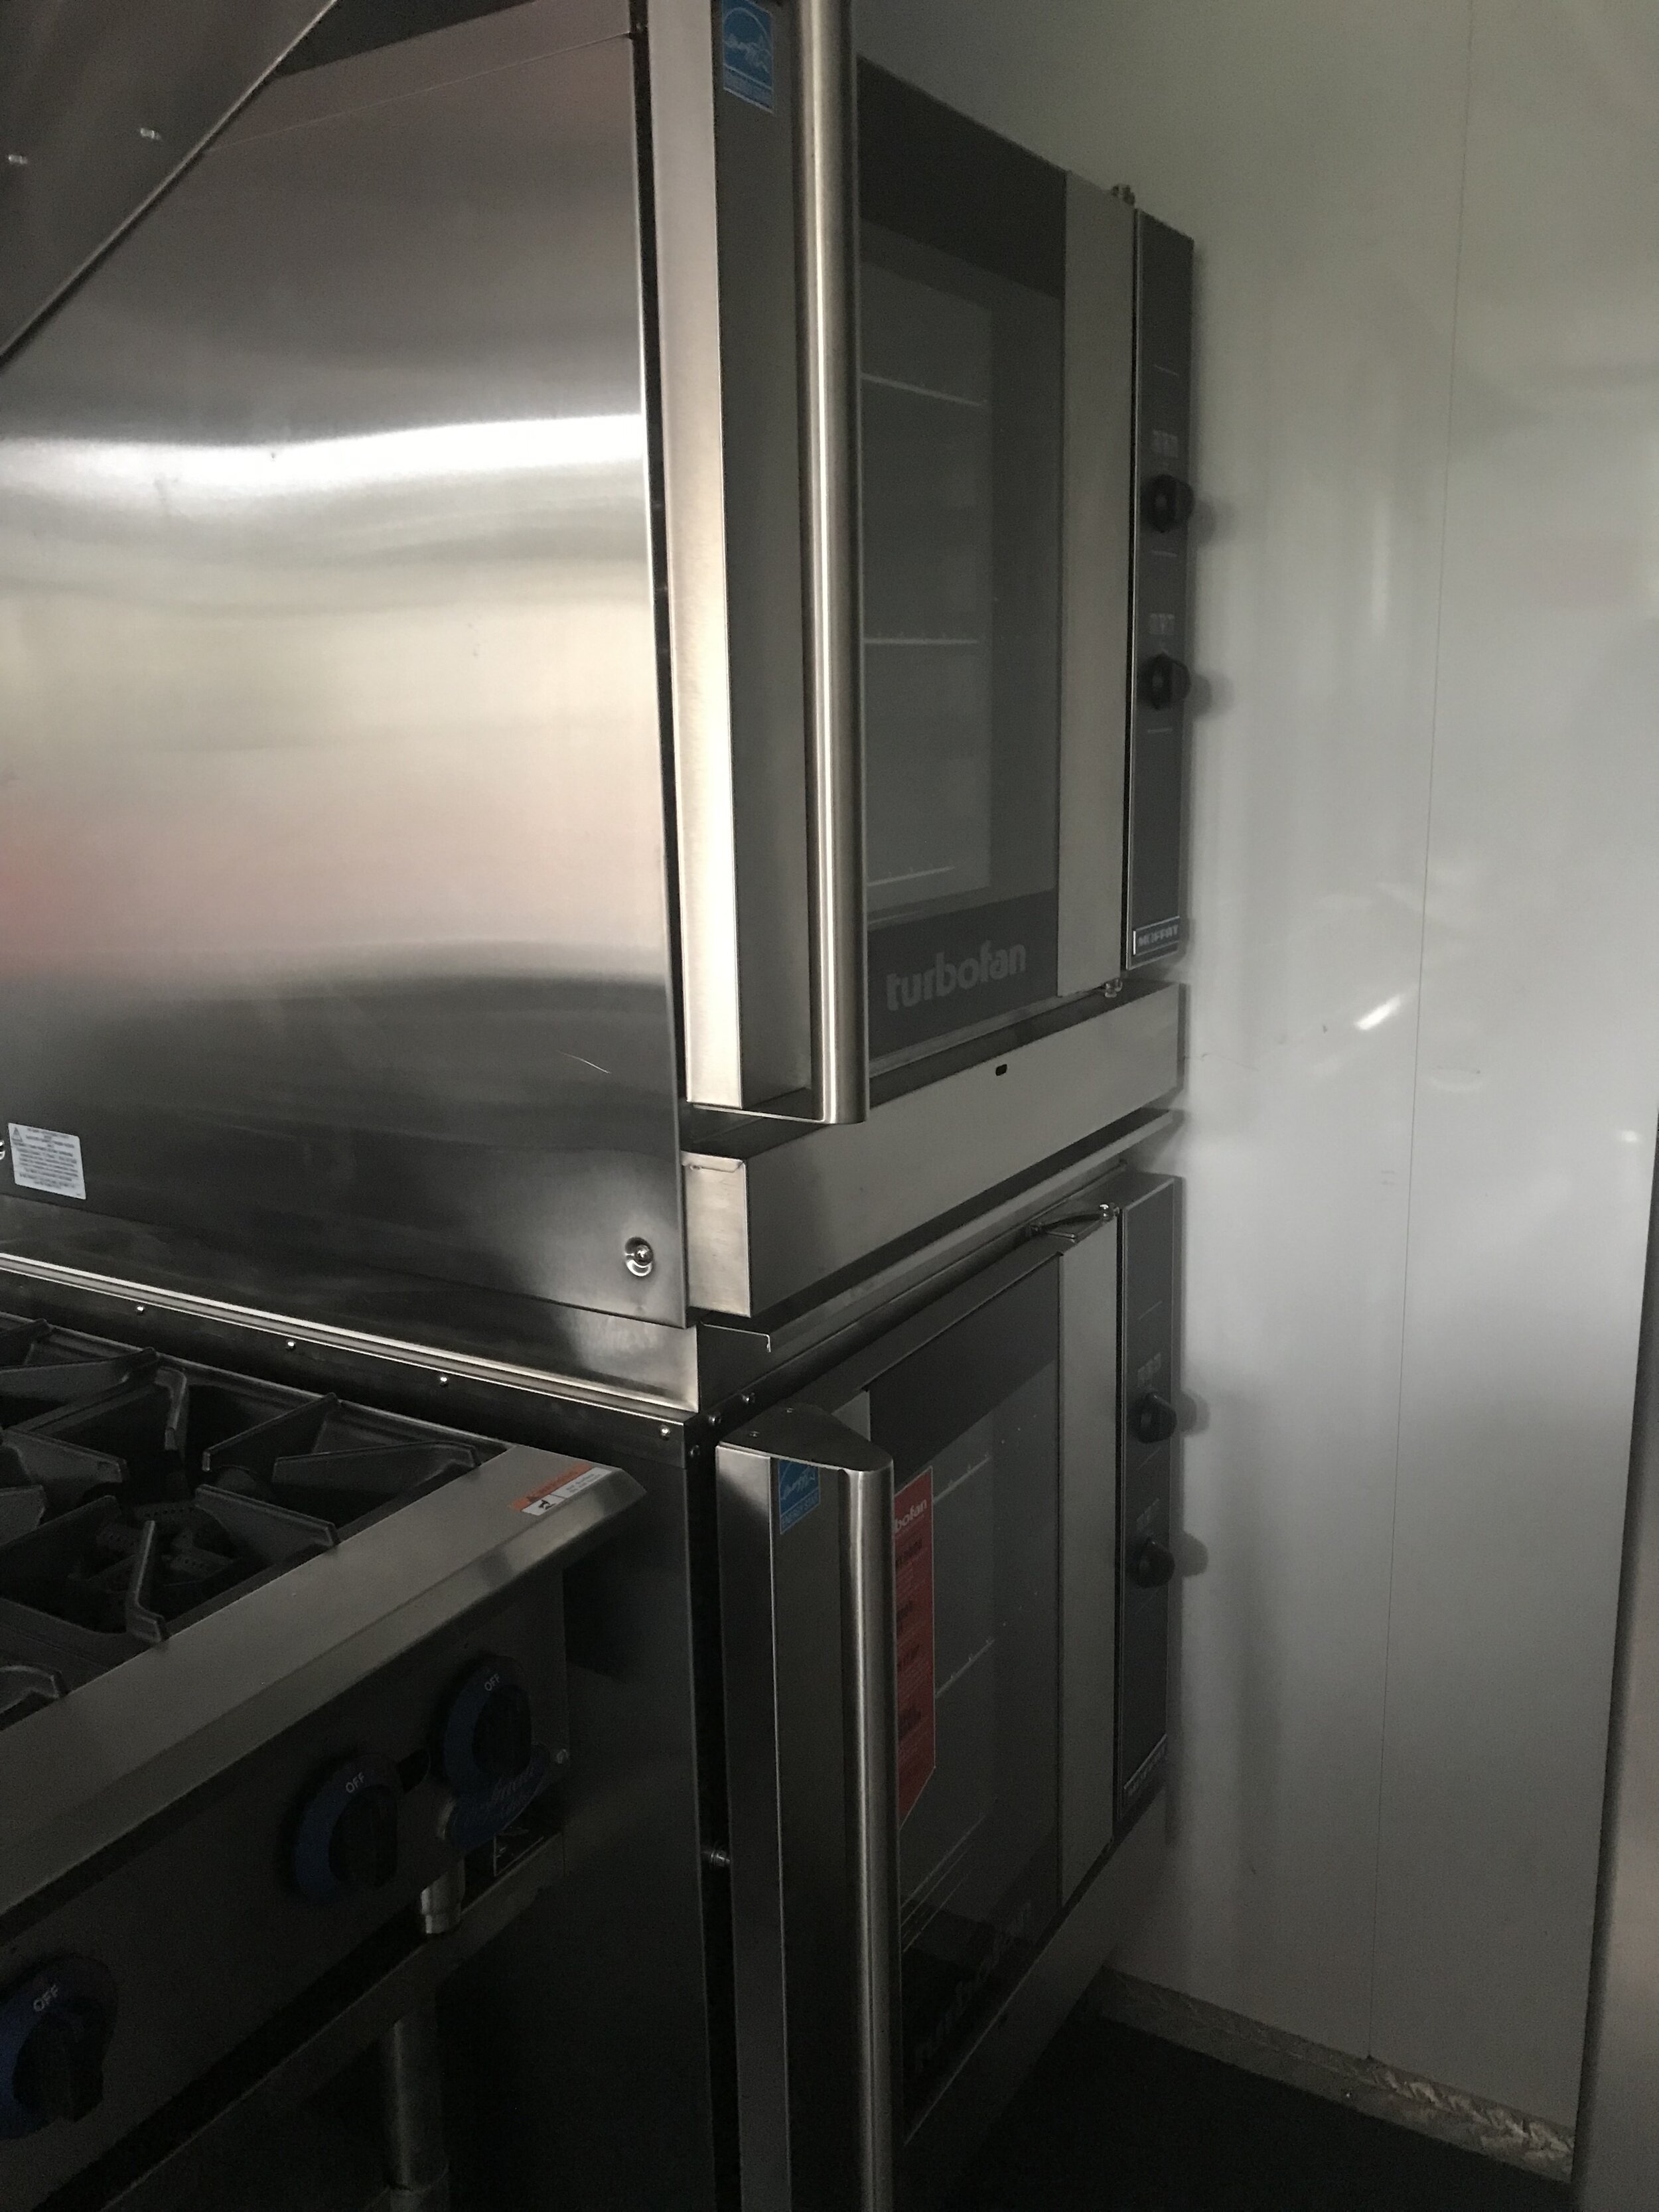  A double convection oven 